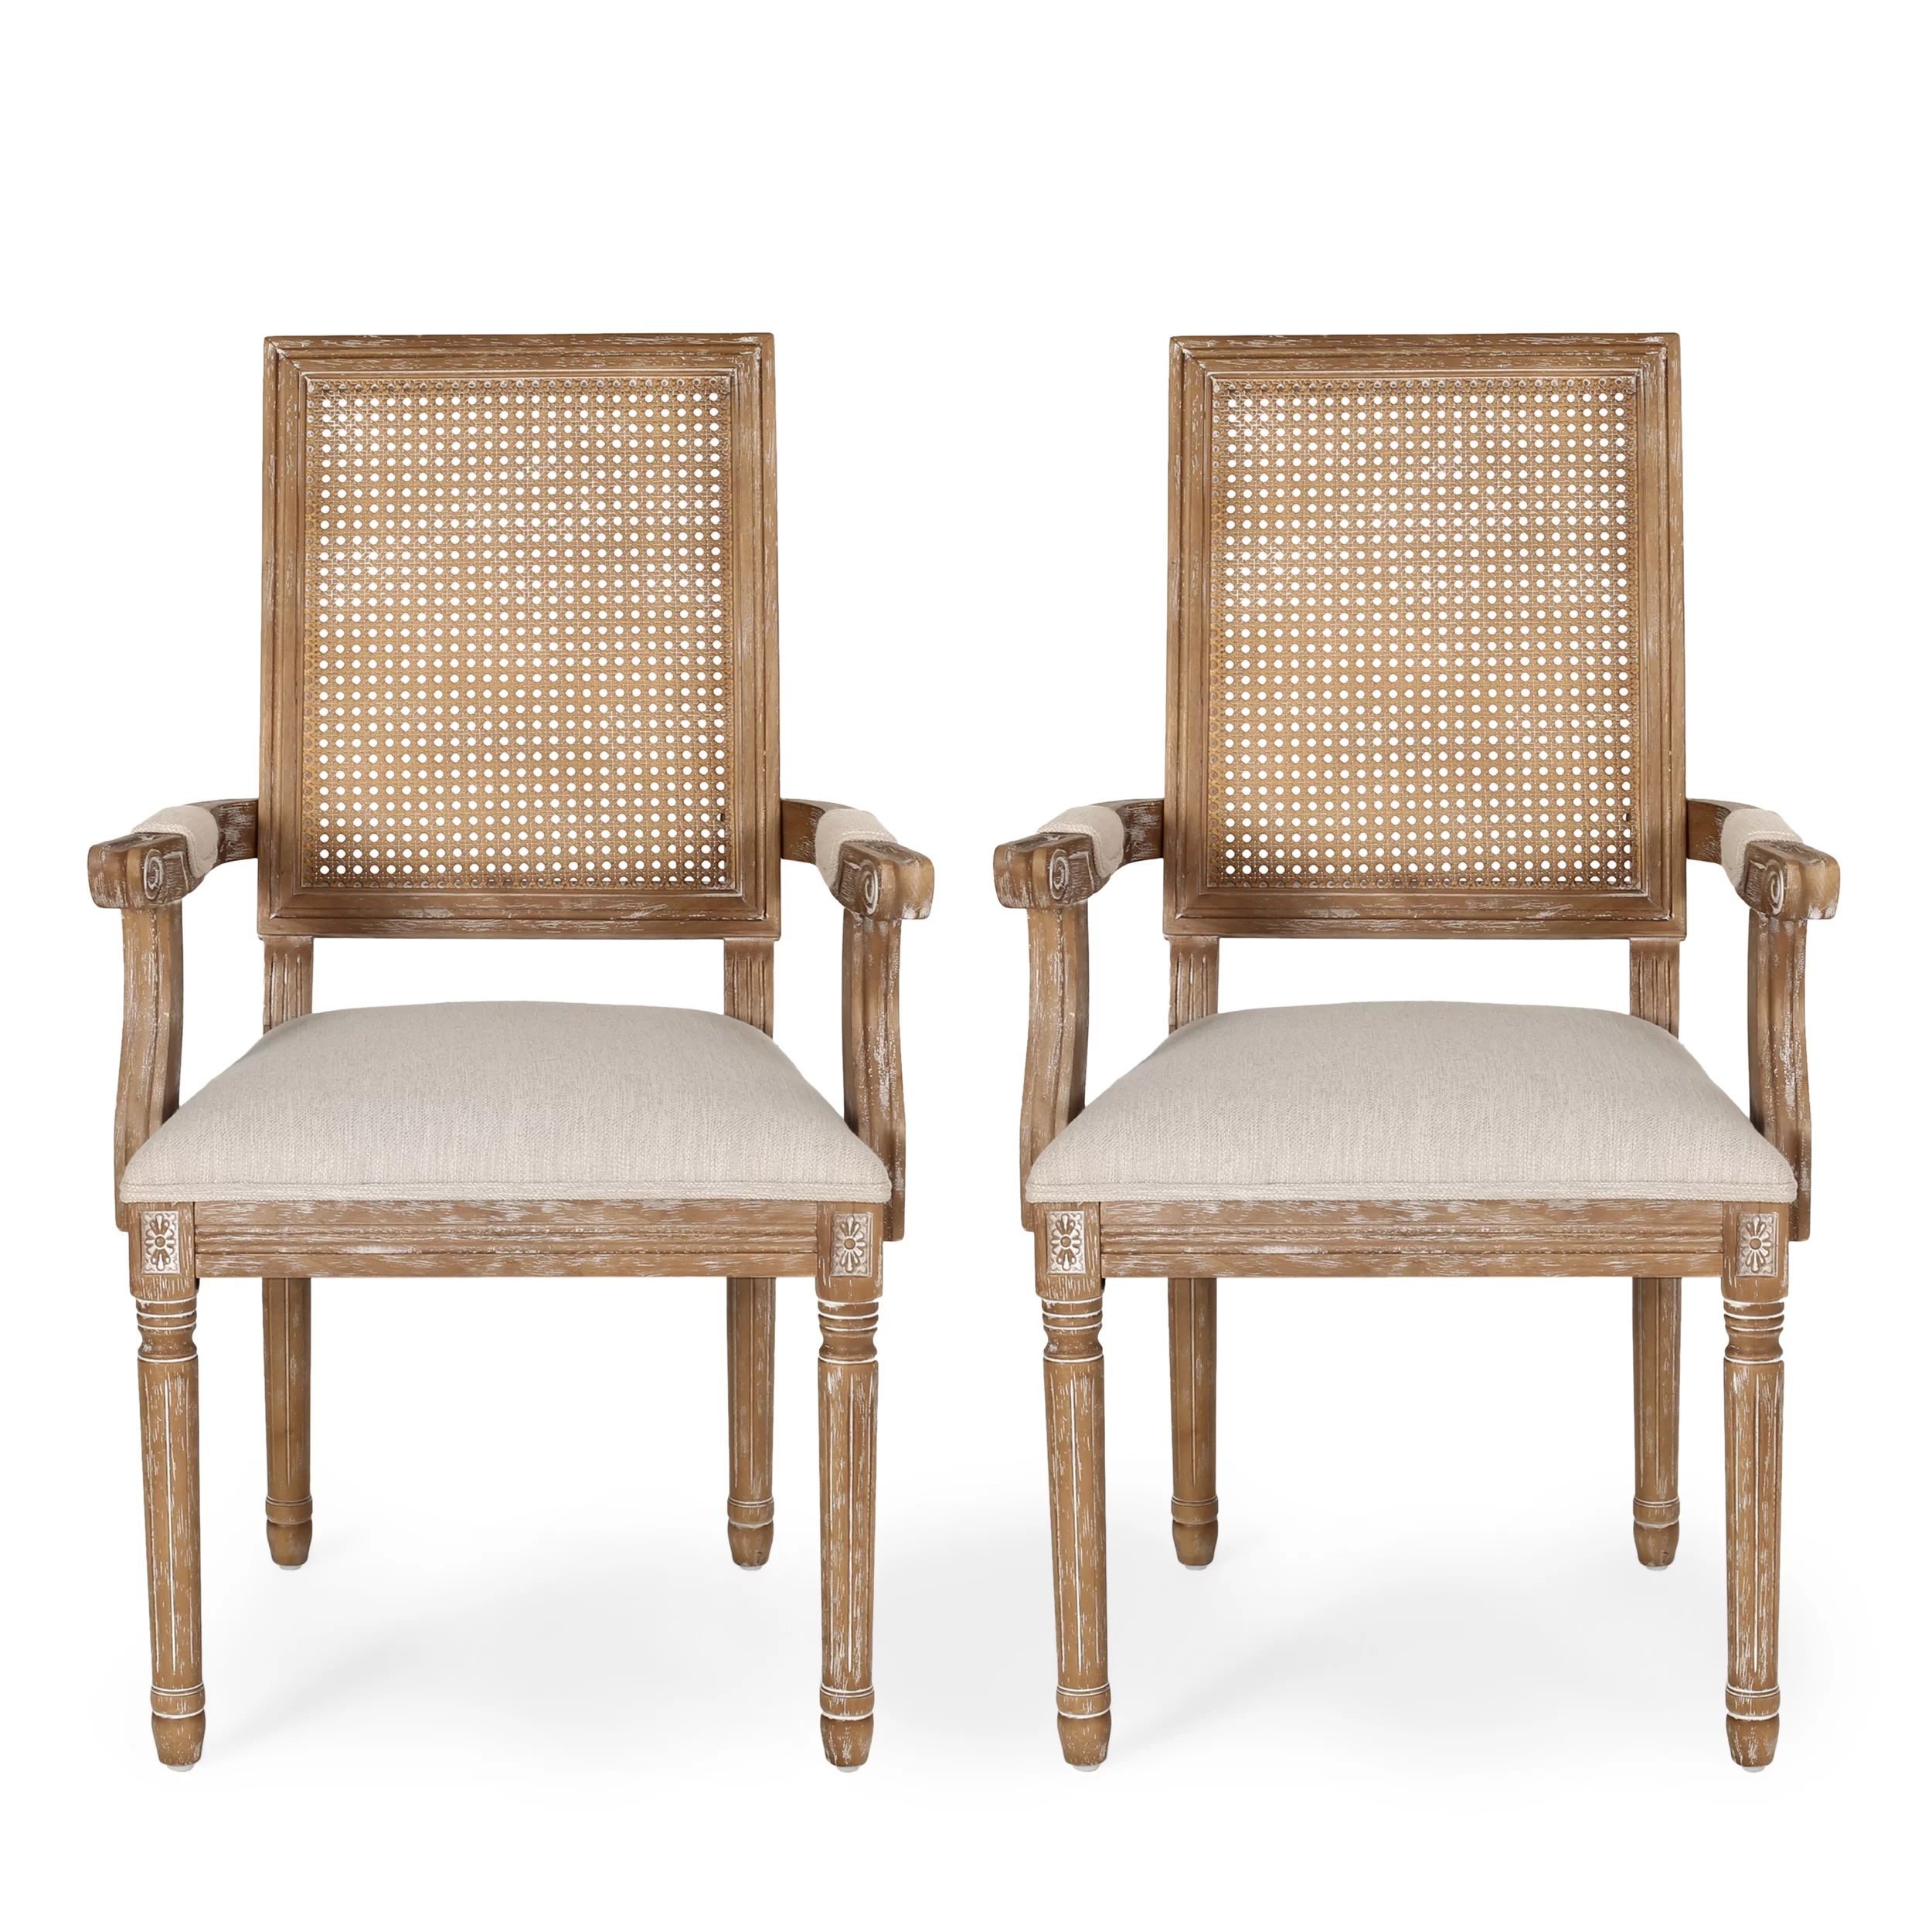 Zentner French Country Wood and Cane Upholstered Dining Chair, Set of 2, Beige and Natural | Walmart (US)